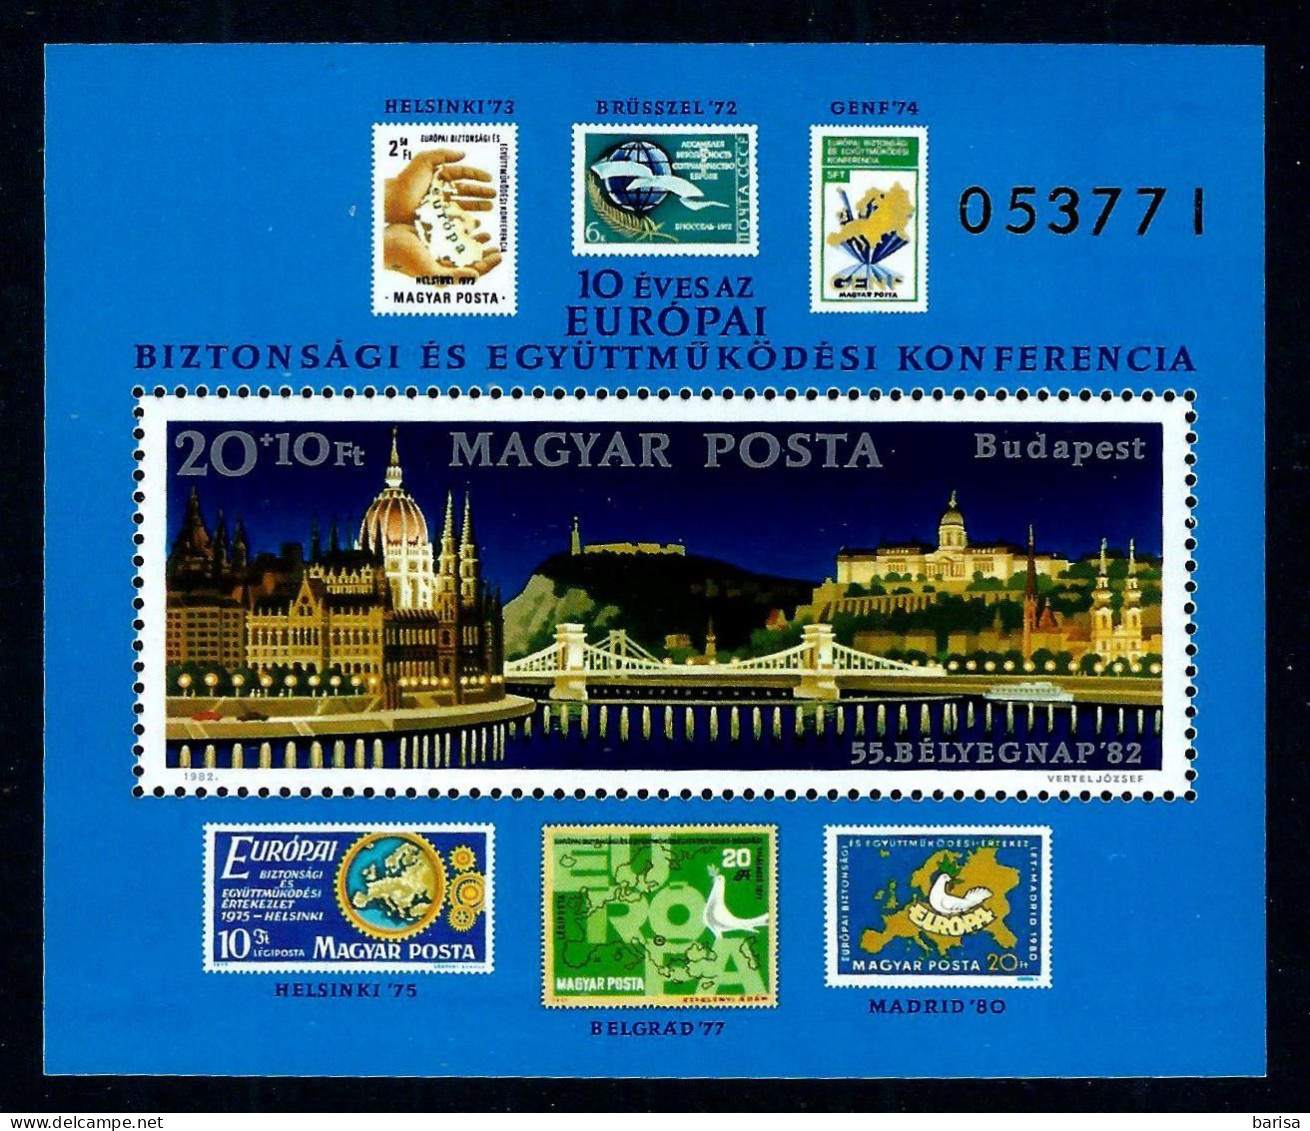 (A6) Hungary 1982: 10 Years Conference On European Security And Cooperation (CSCE) ** (MNH) - European Ideas